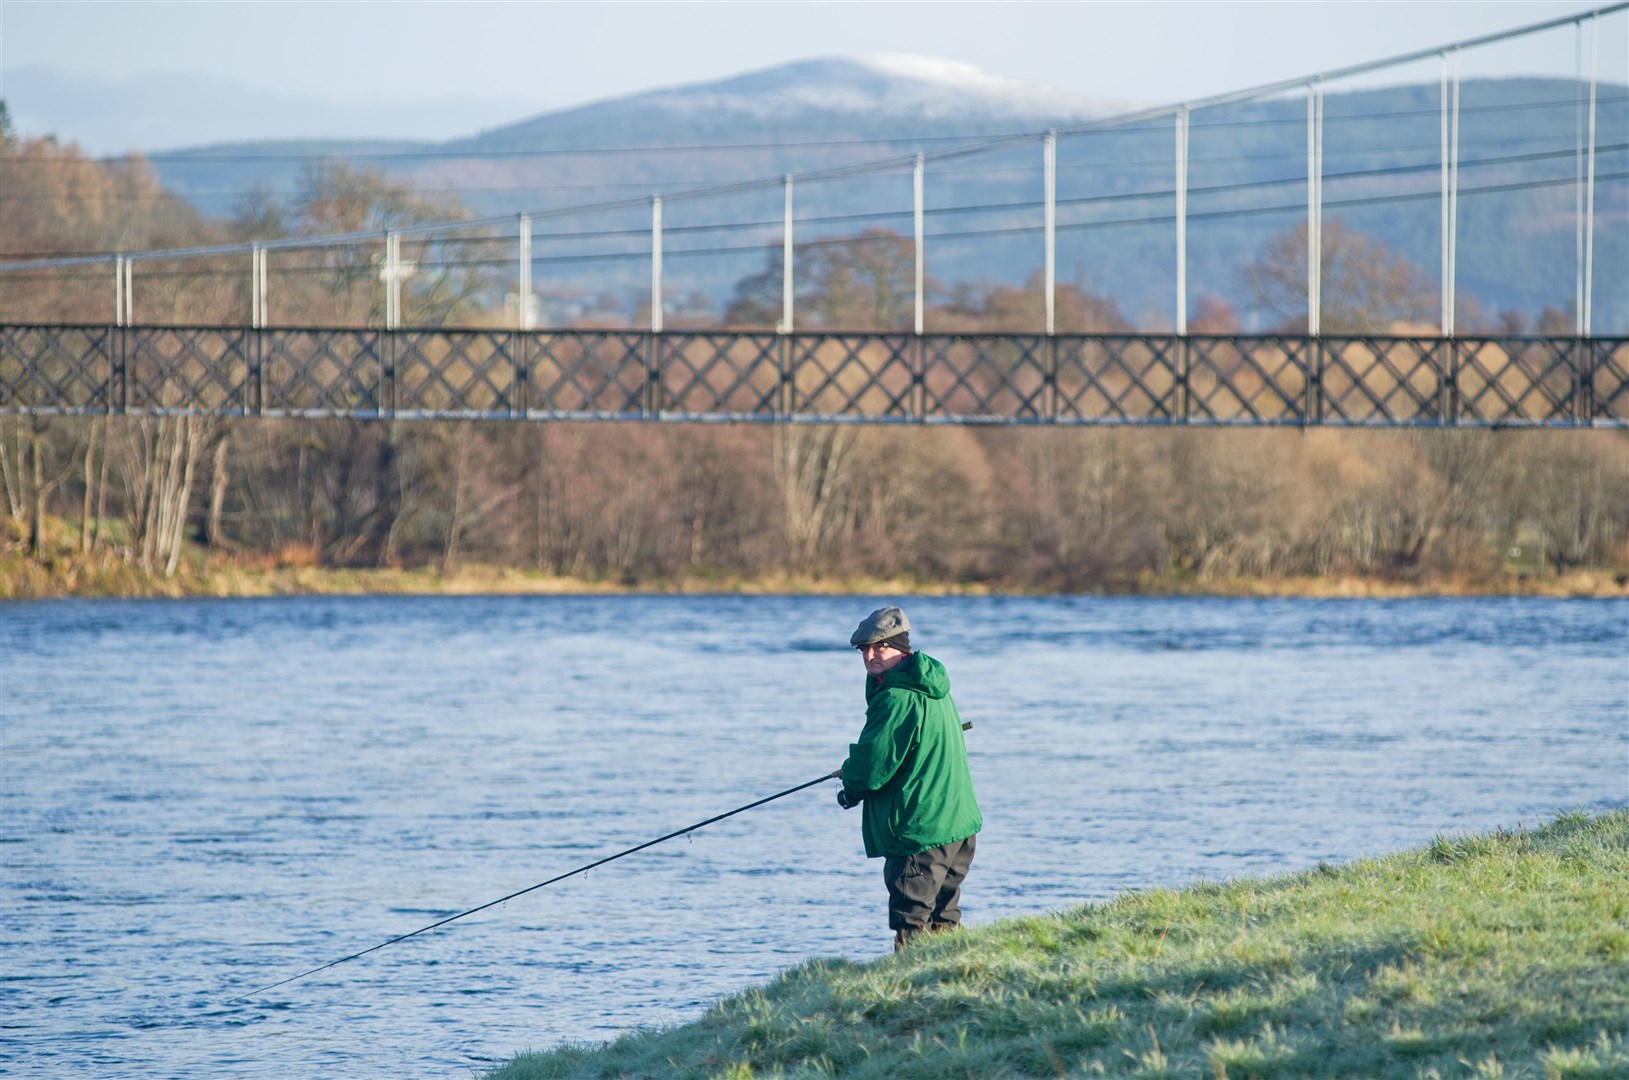 Fishing downstream on the River Spey at Aberlour. Picture: Daniel Forsyth.